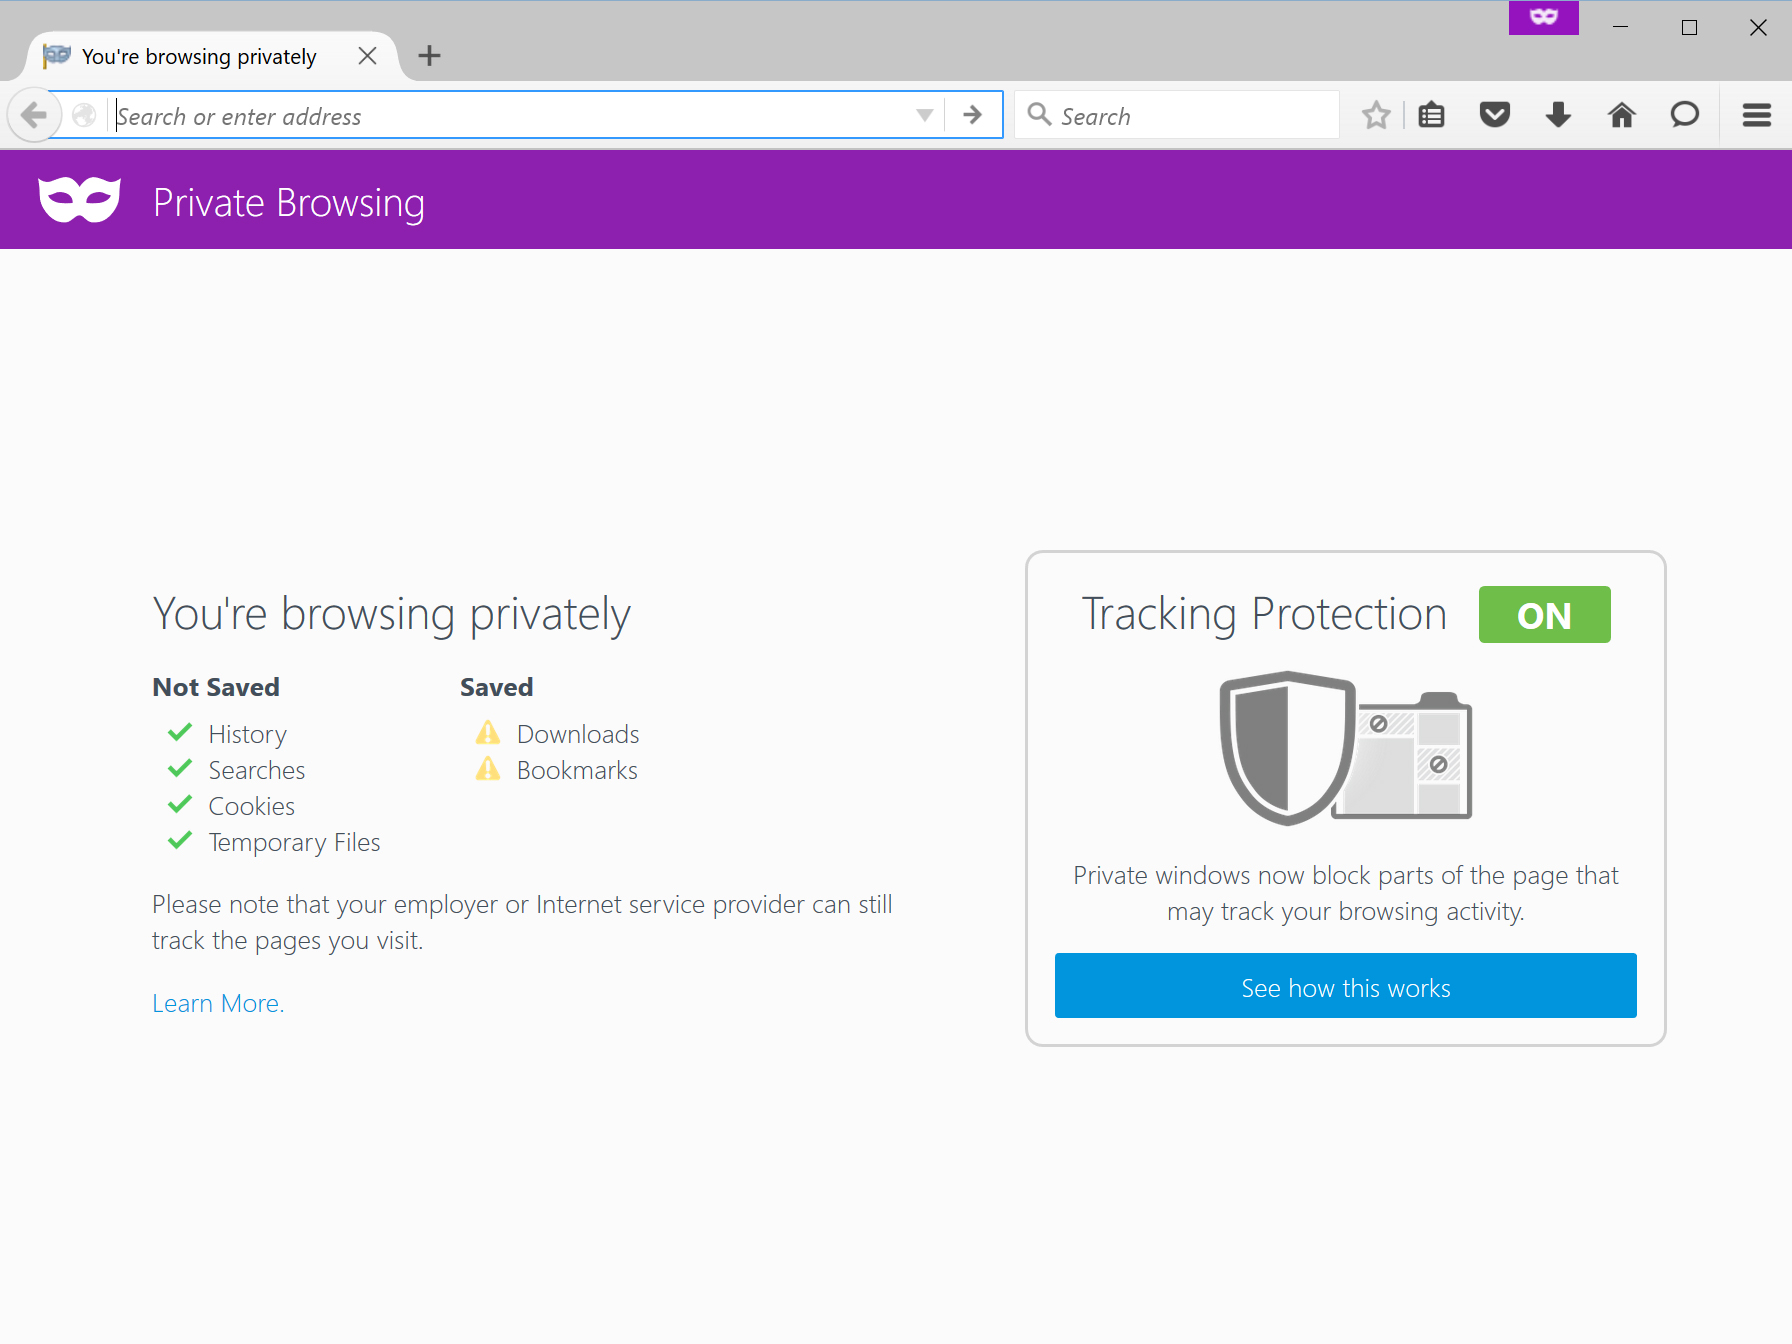 Firefox Now Offers a More Private Browsing Experience - The Mozilla Blog